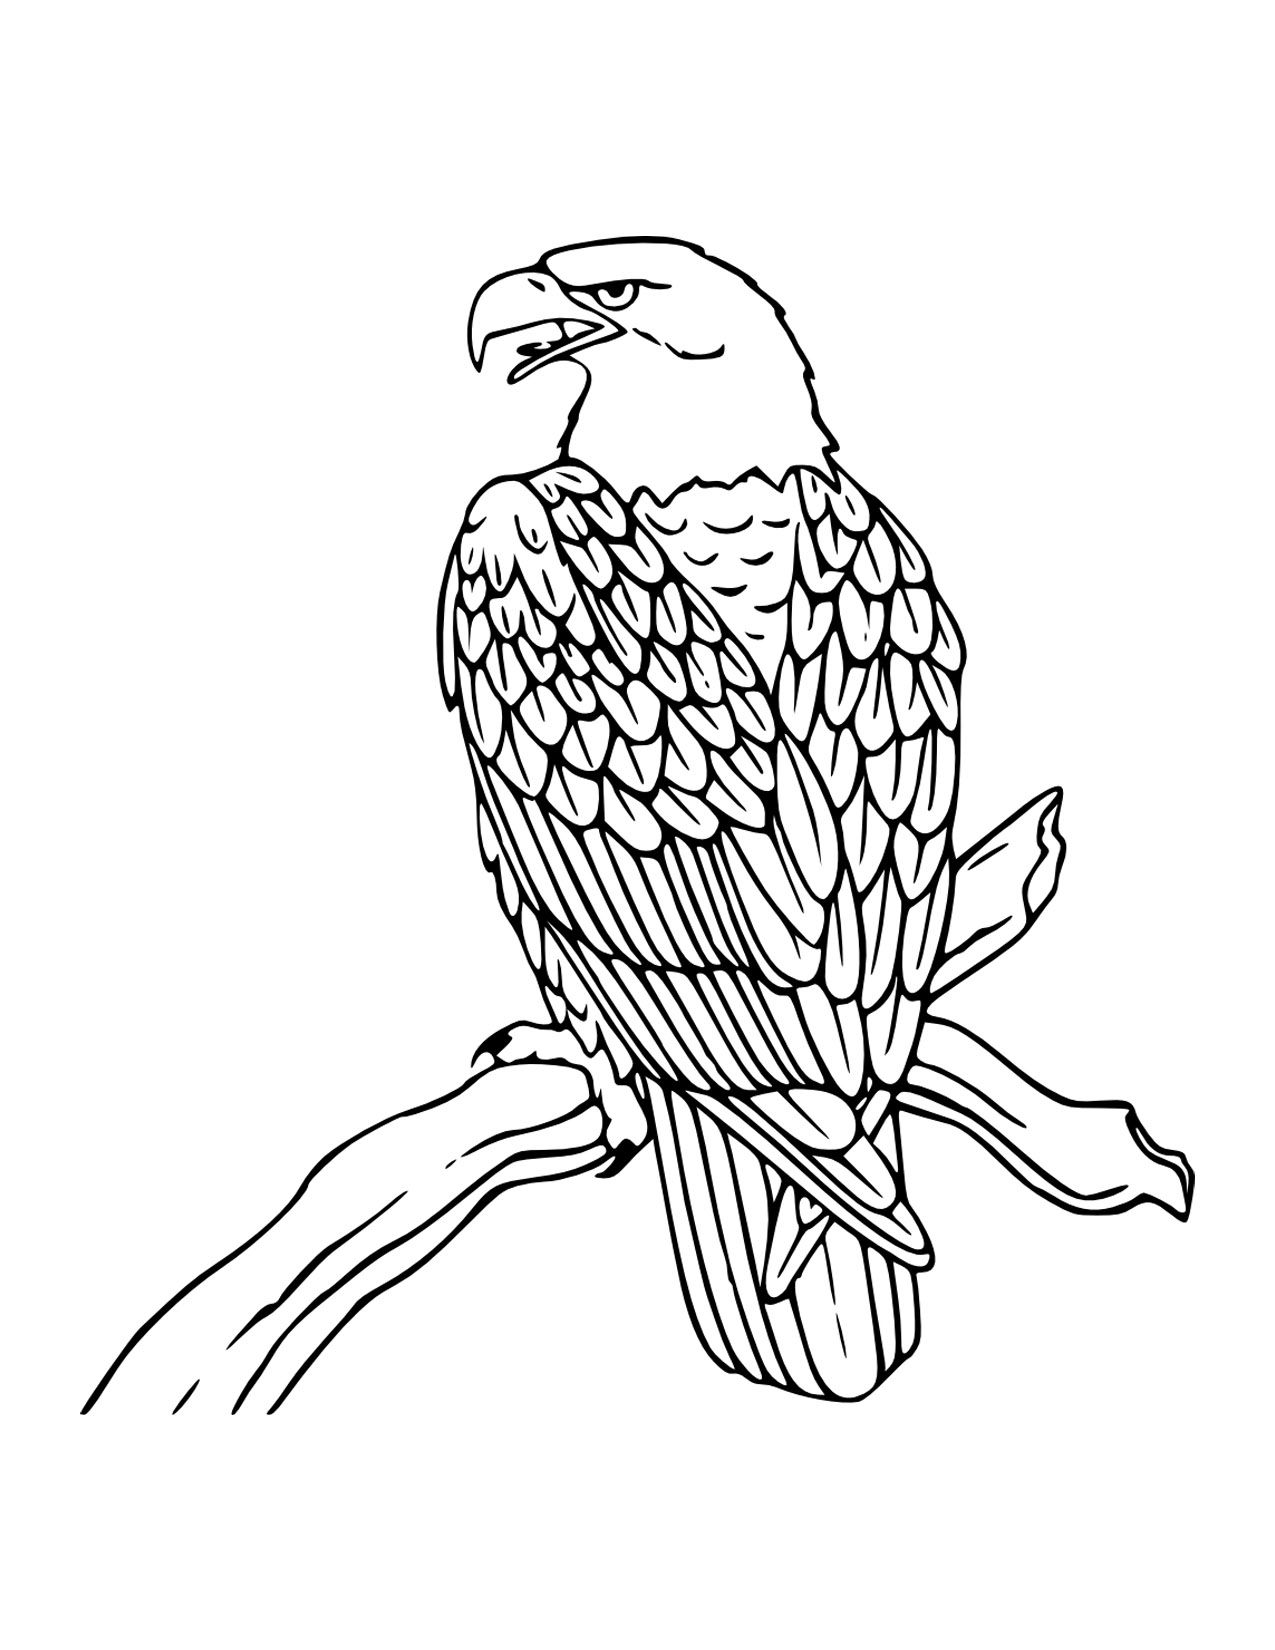 Bald eagle coloring pages for kids eagle drawing bird coloring pages animal coloring pages